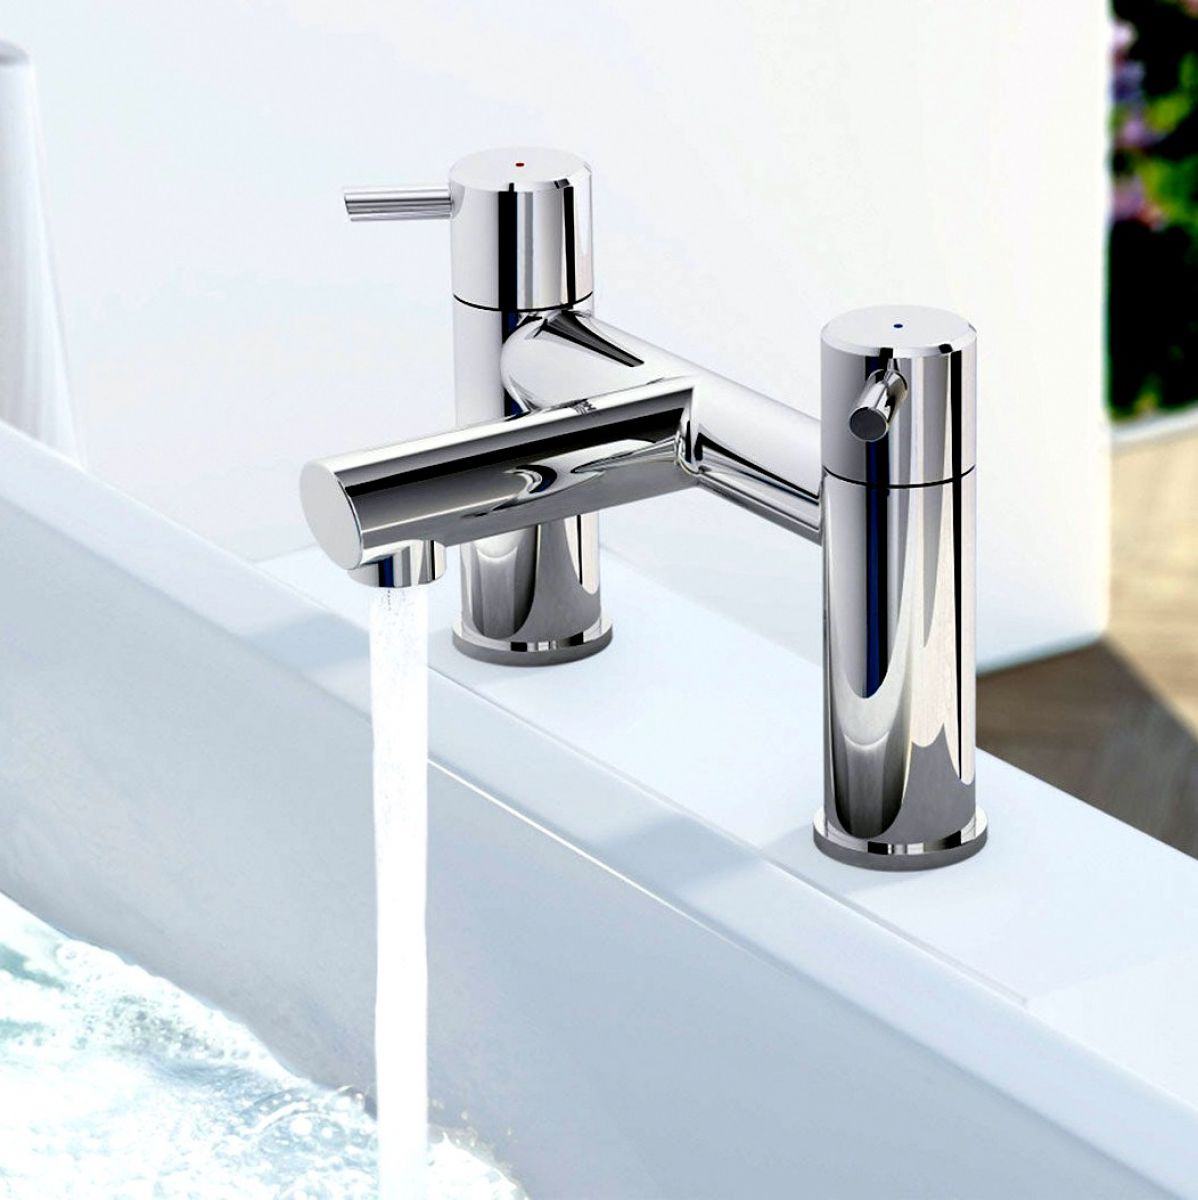 picture of a bath mixer tap